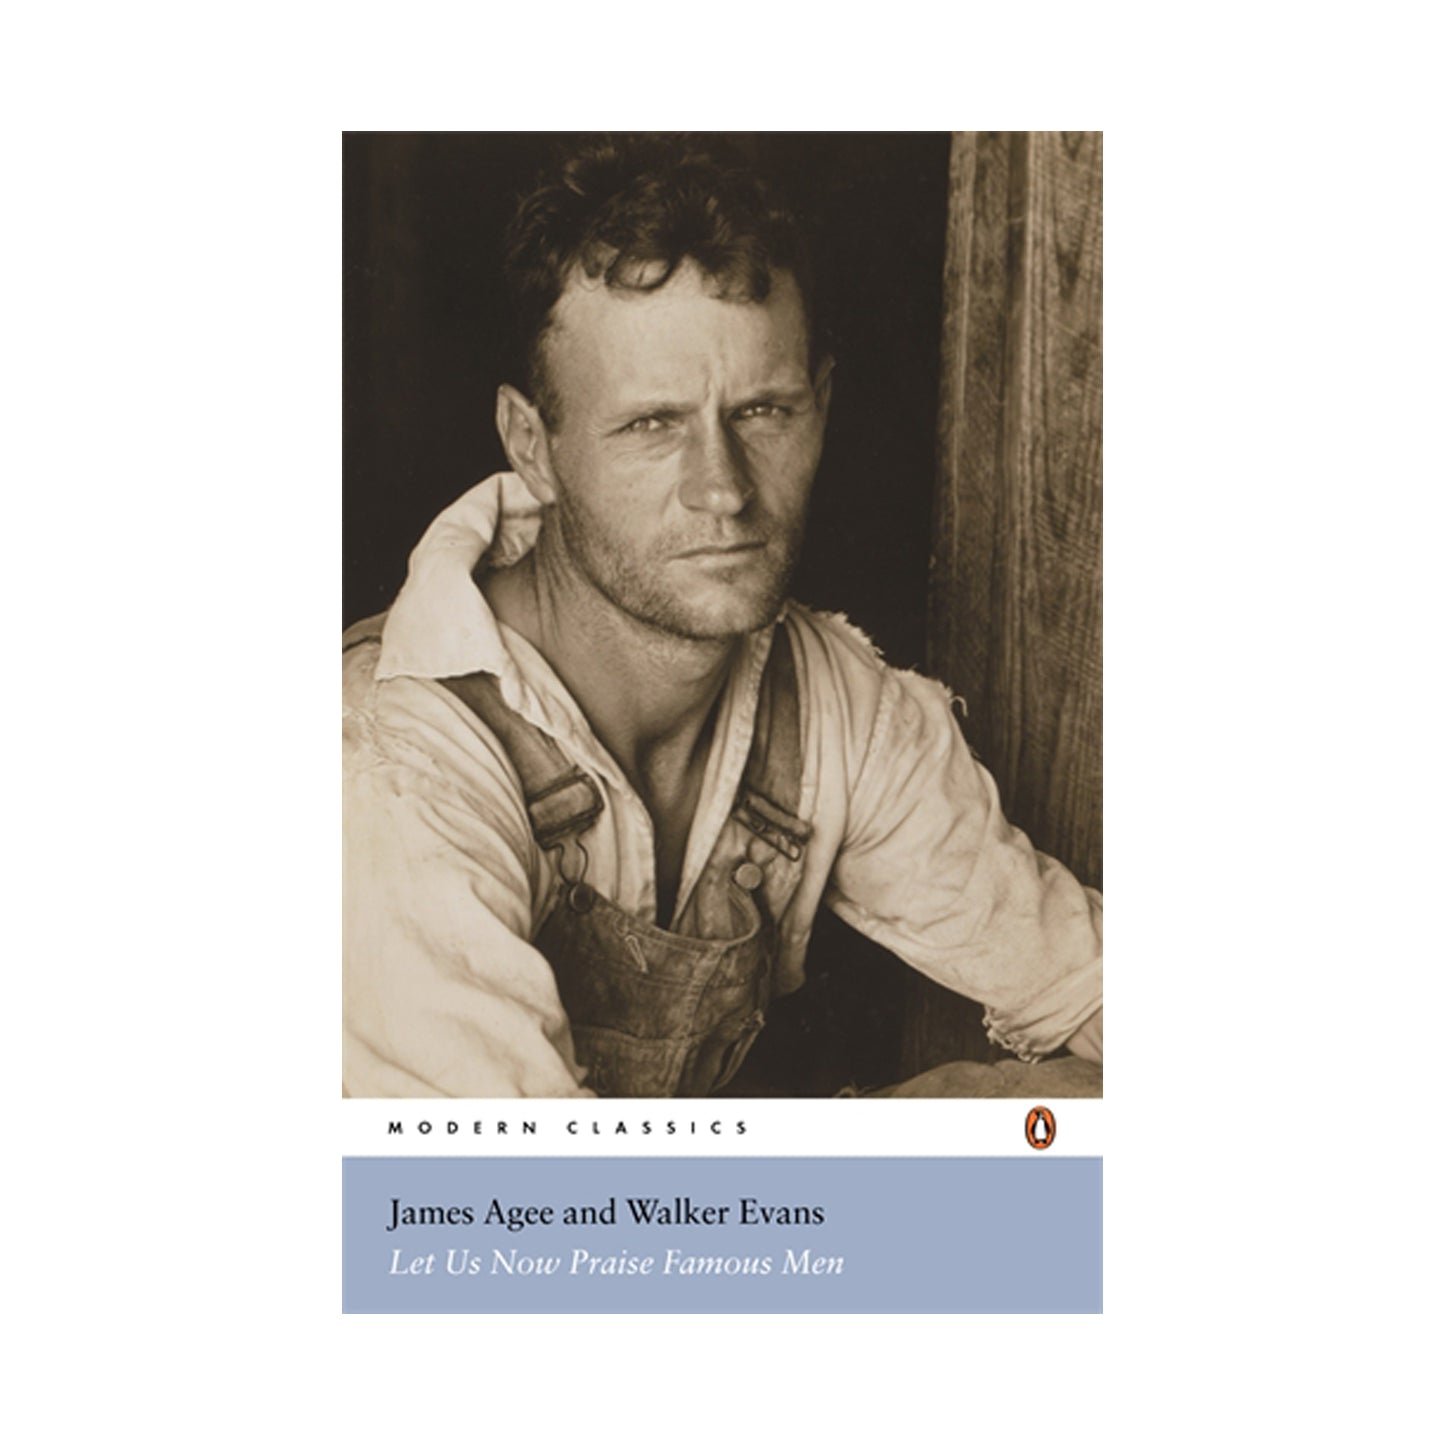 Let Us Now Praise Famous Men by James Agee and Walker Evans